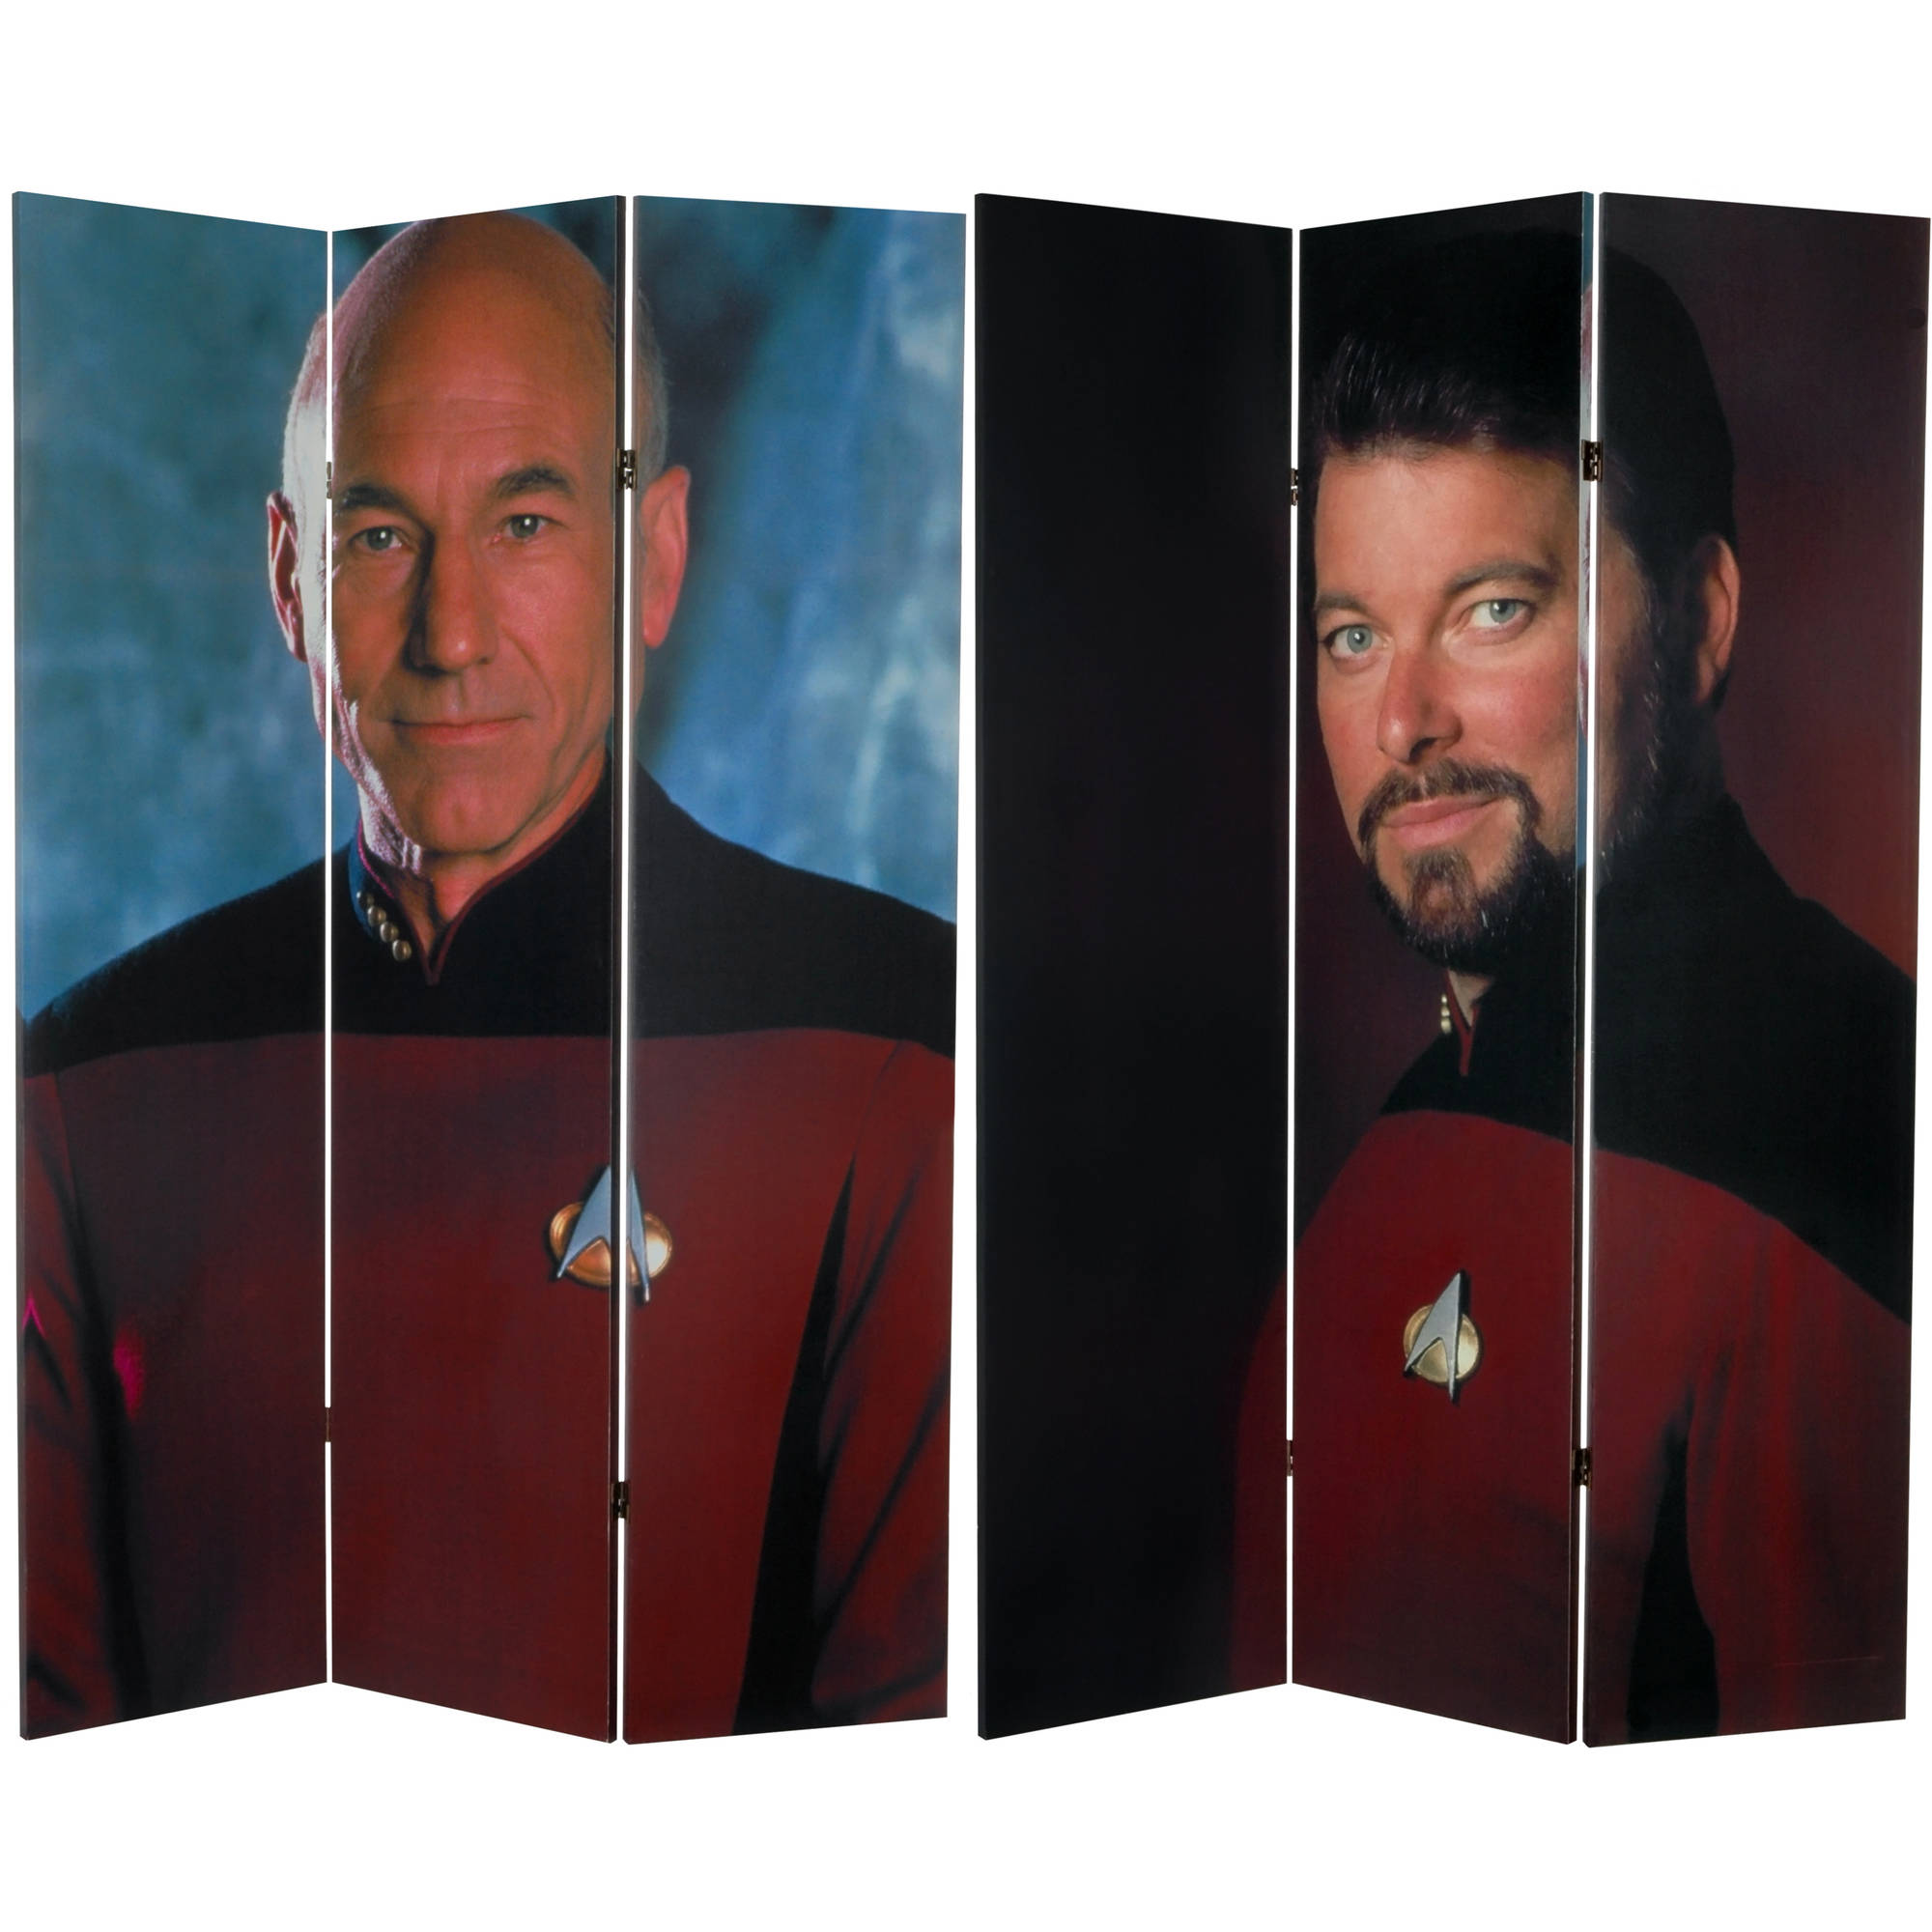 Oriental Furniture 6 Ft Tall Double Sided Star Trek Picard and Riker Canvas Room Divider - image 1 of 3